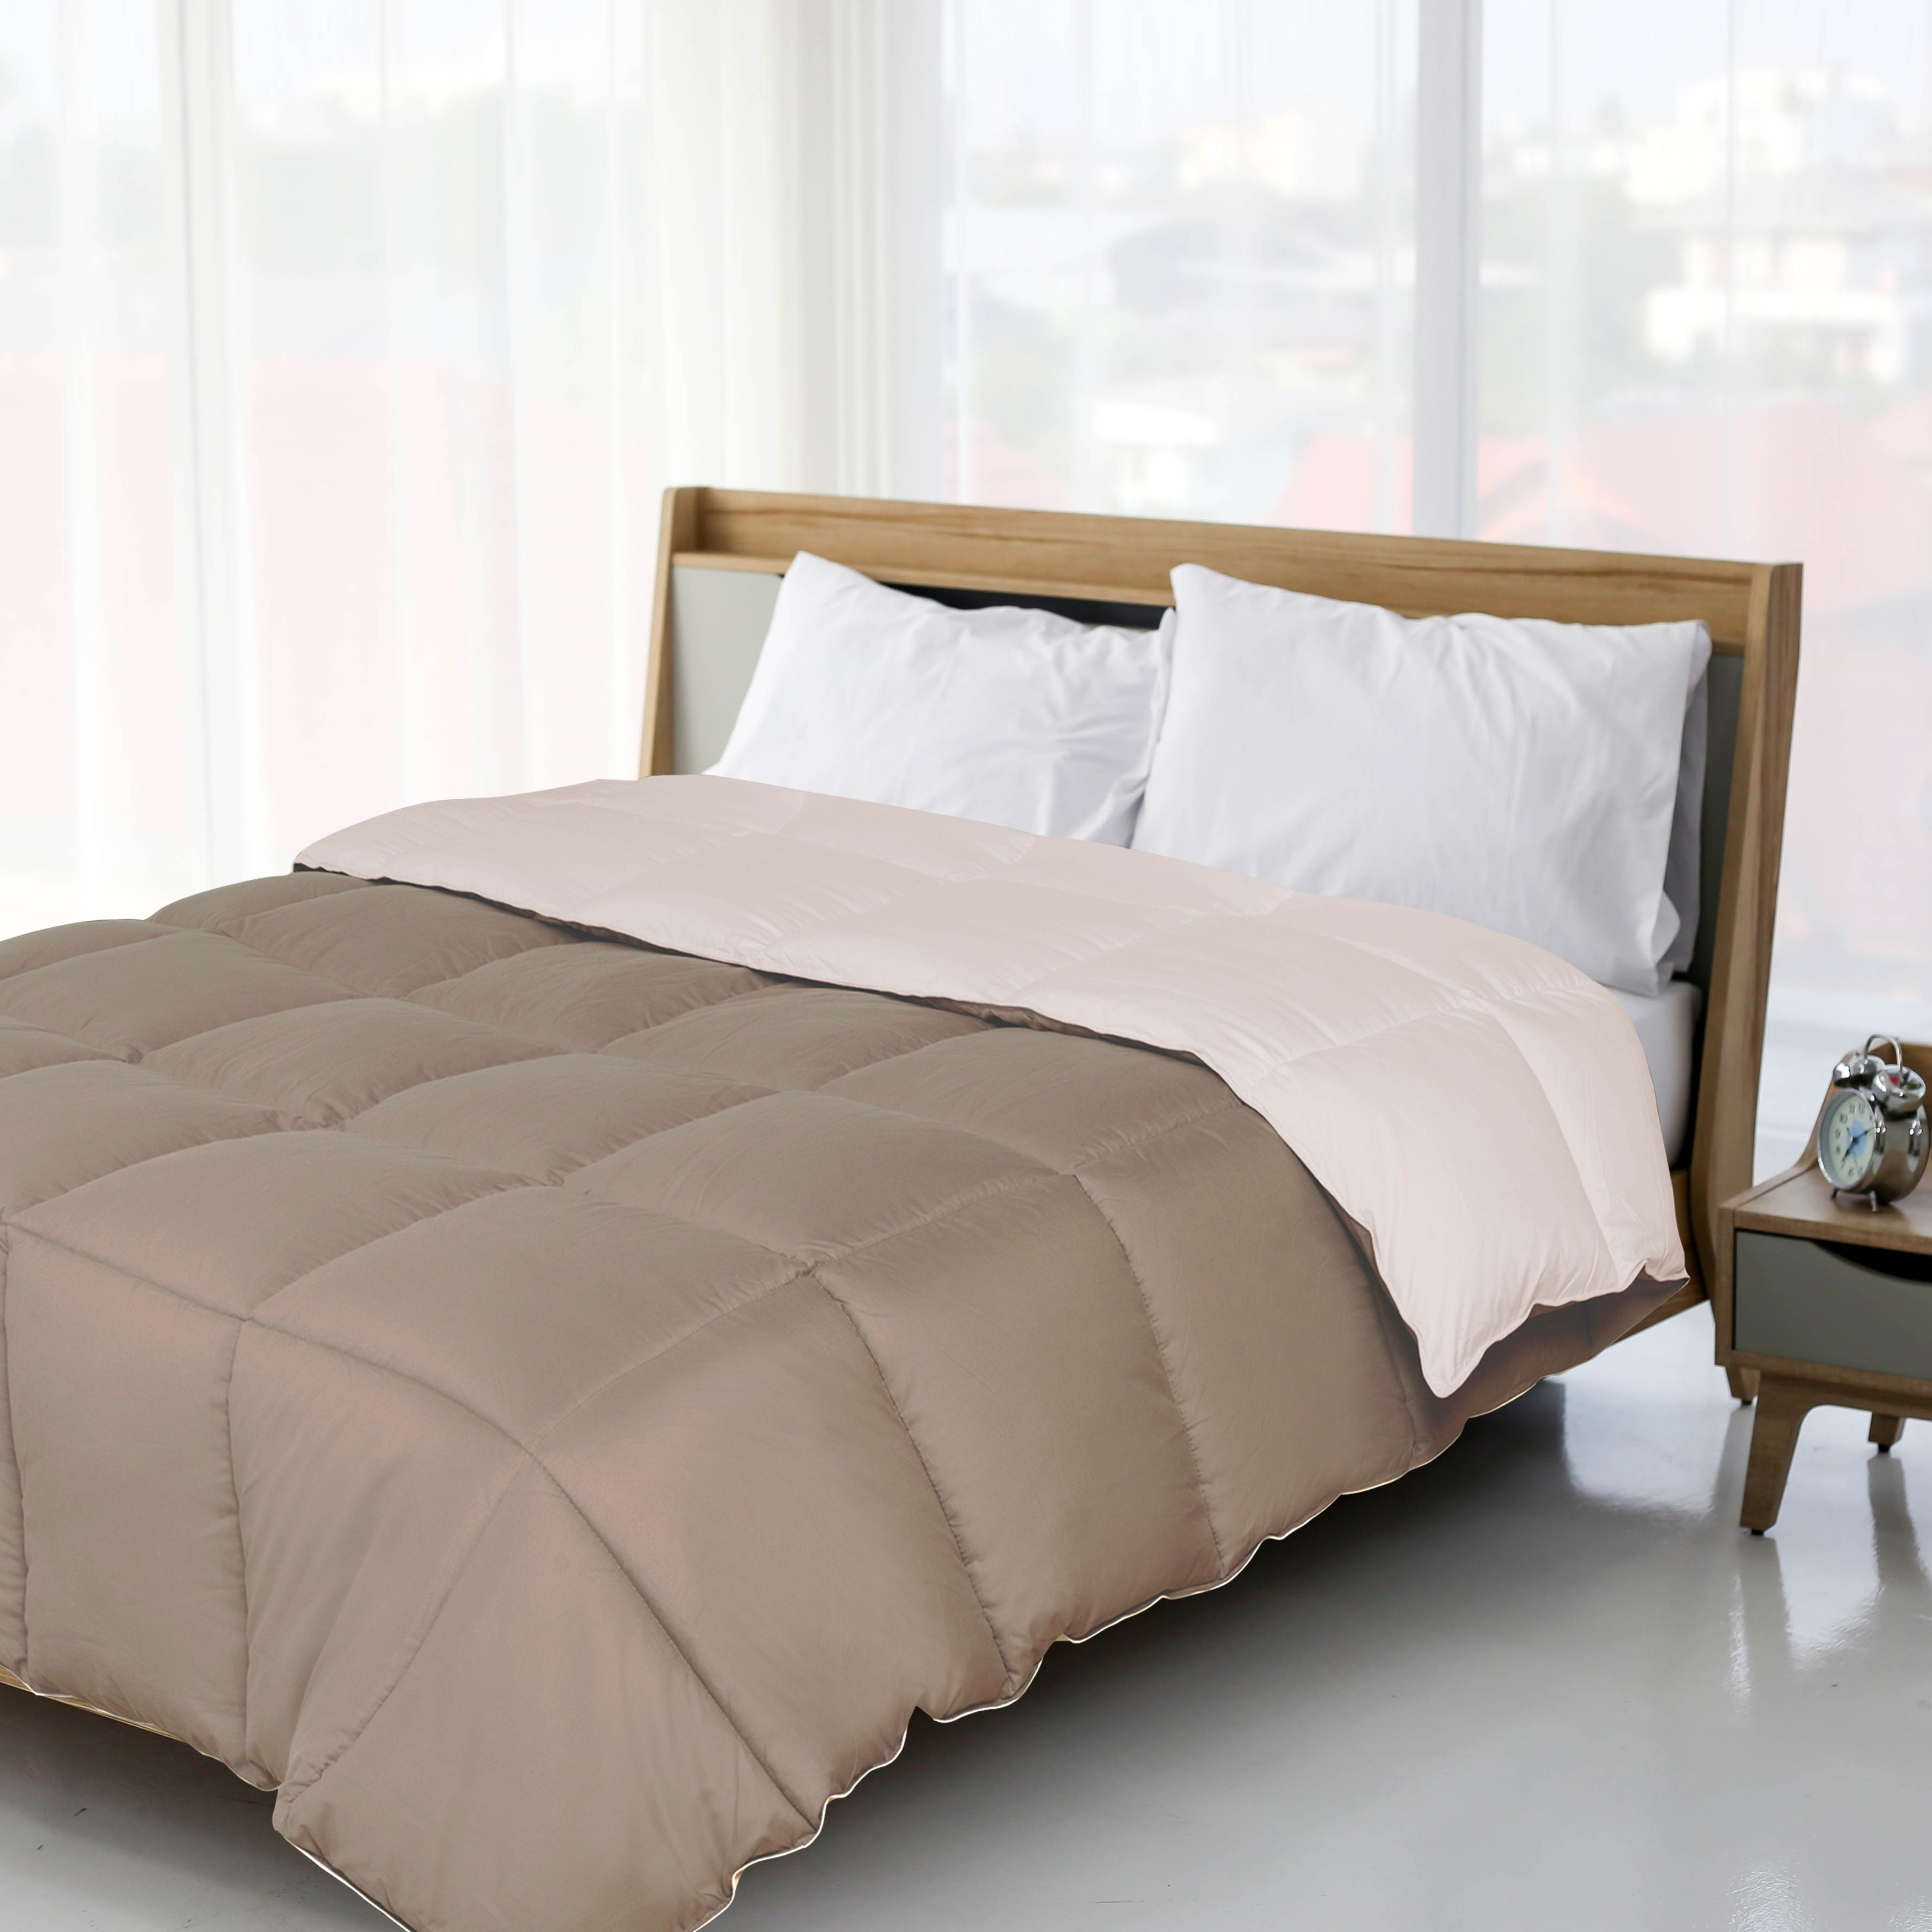 Superior Down Alternative Reversible Comforter, Full/ Queen, Ivory/ Taupe - image 2 of 4